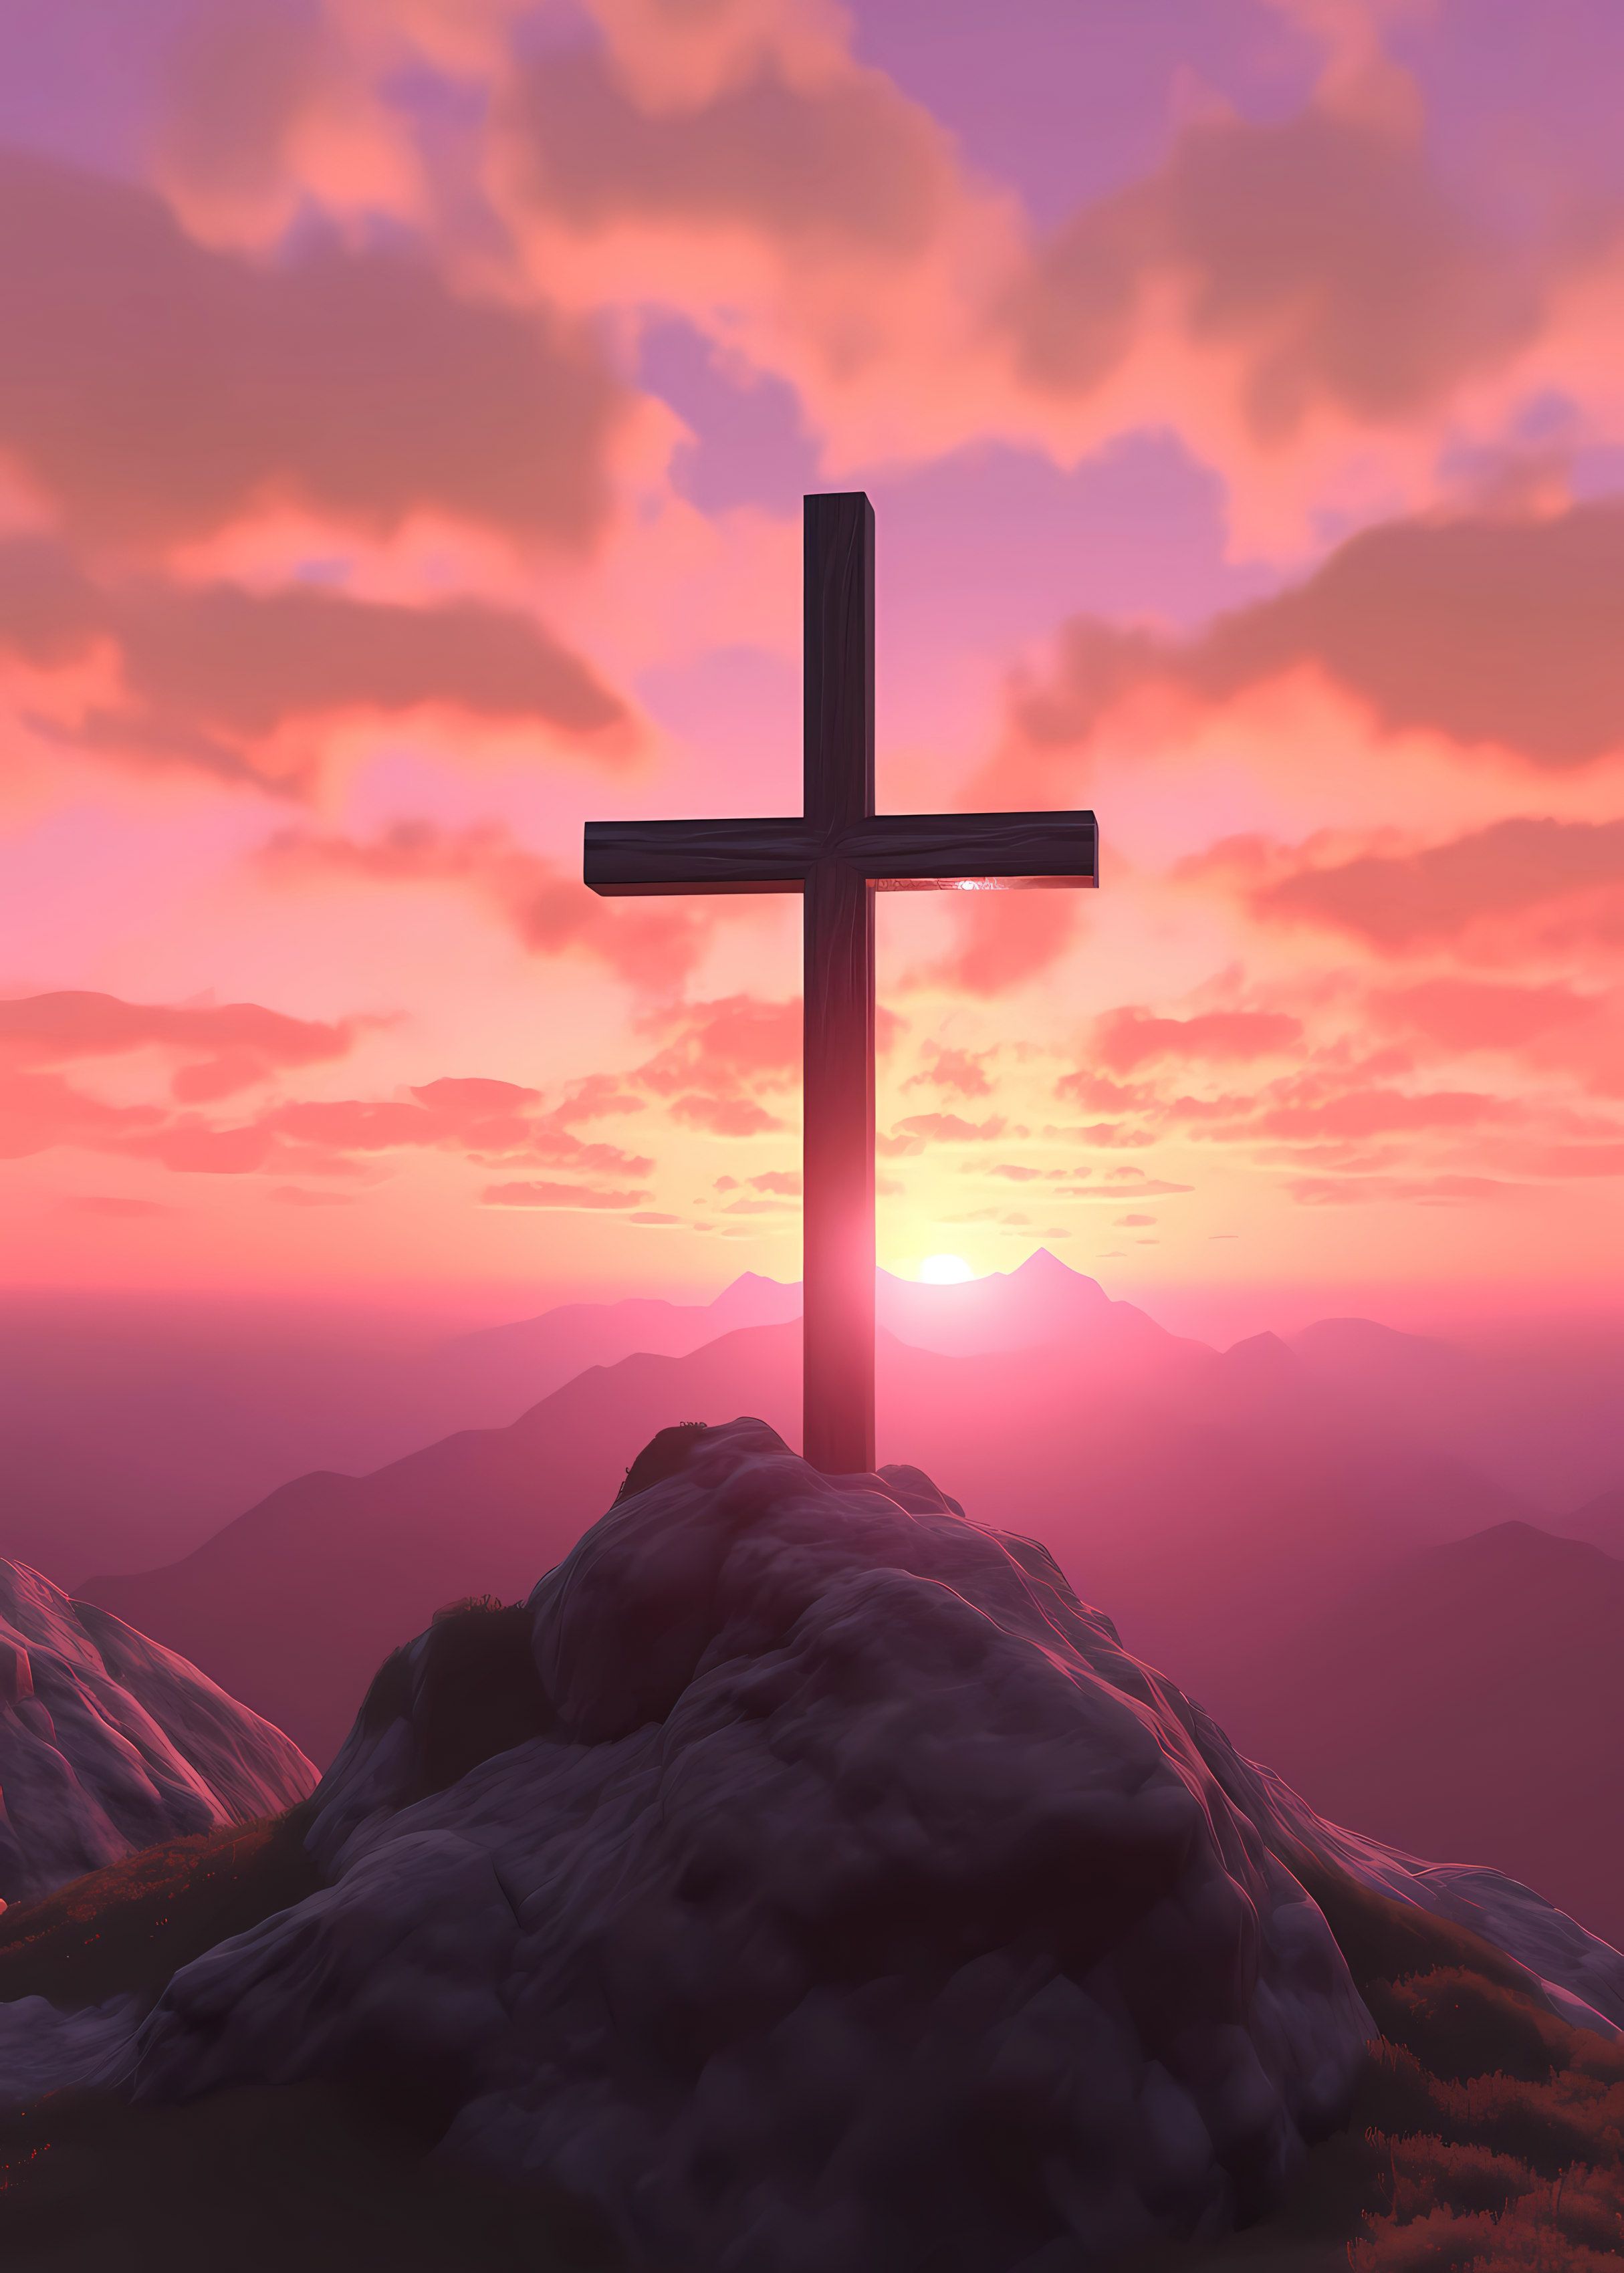 A cross on a hill with a sunset in the background. - Cross